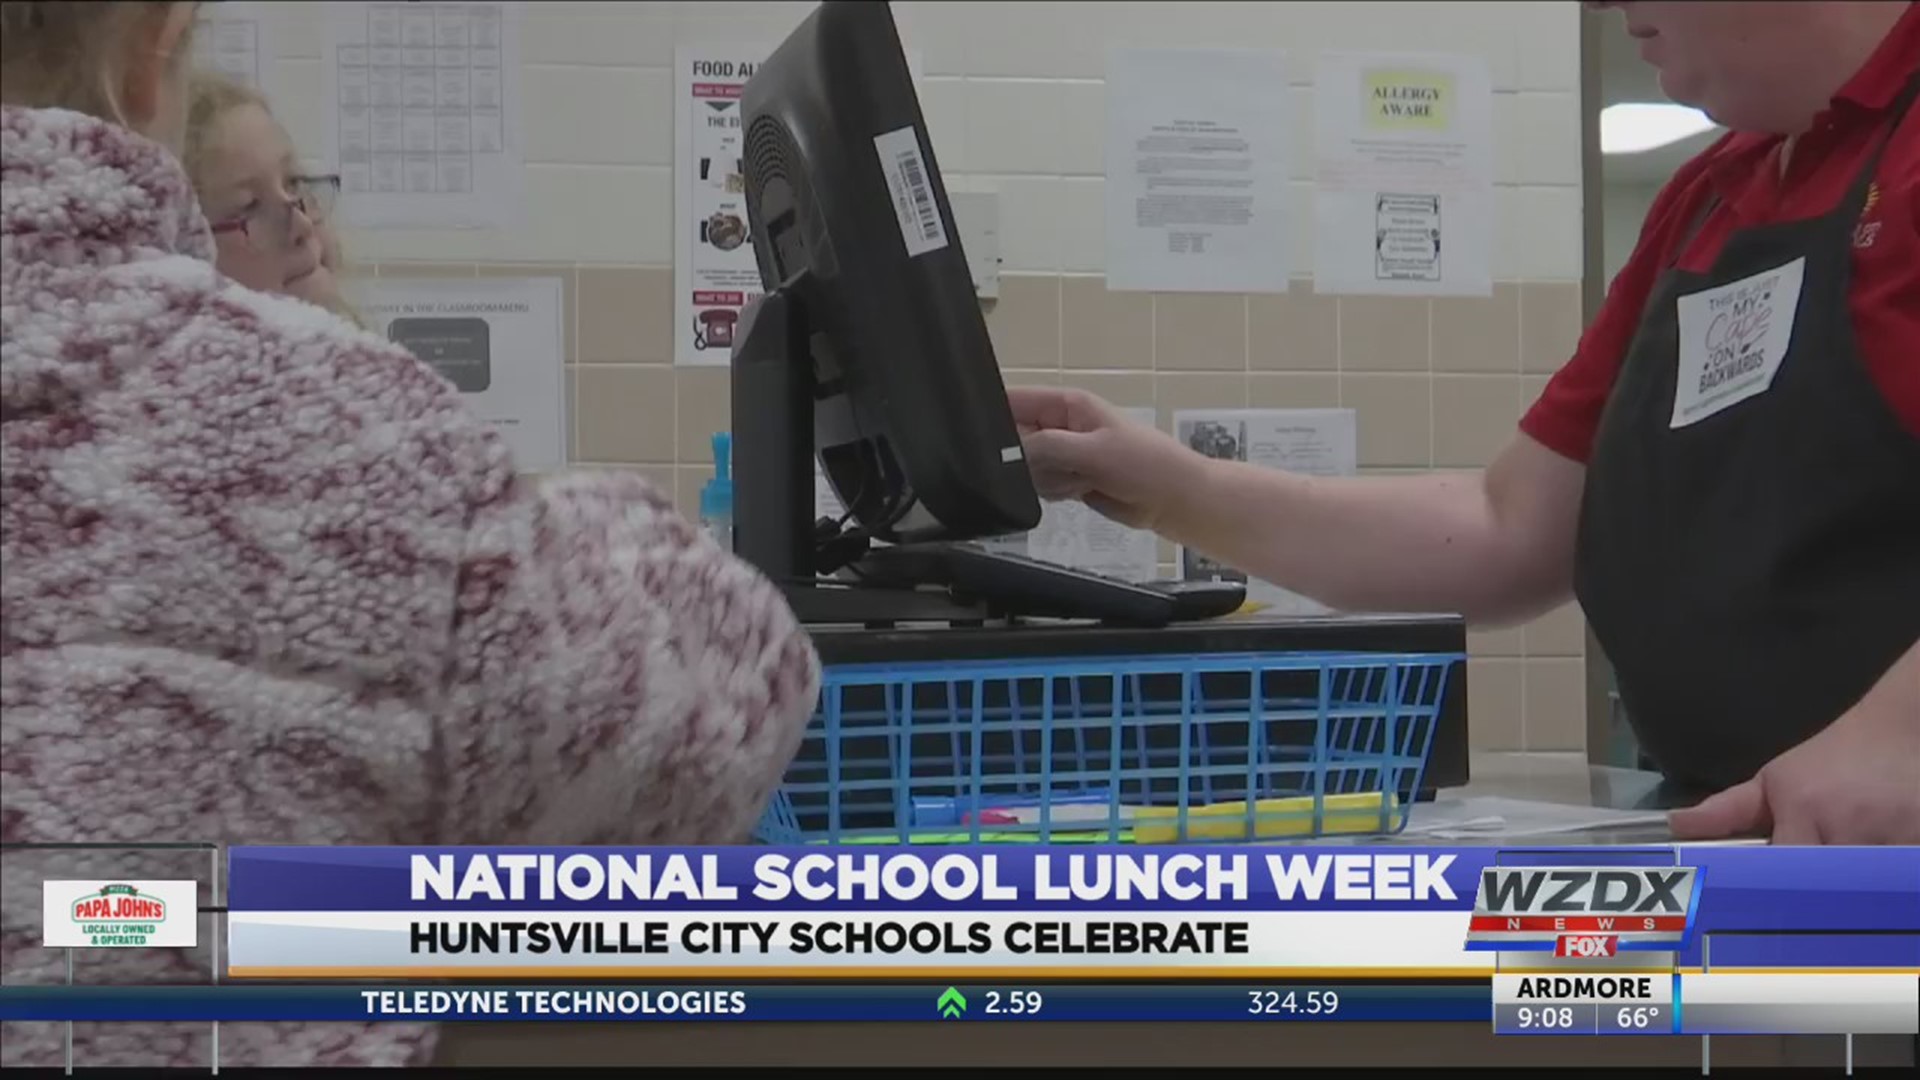 Many kids in Huntsville rely on their schools to feed them each day. This week, the country is shining a light on those who make sure every student gets the nutrition they need.